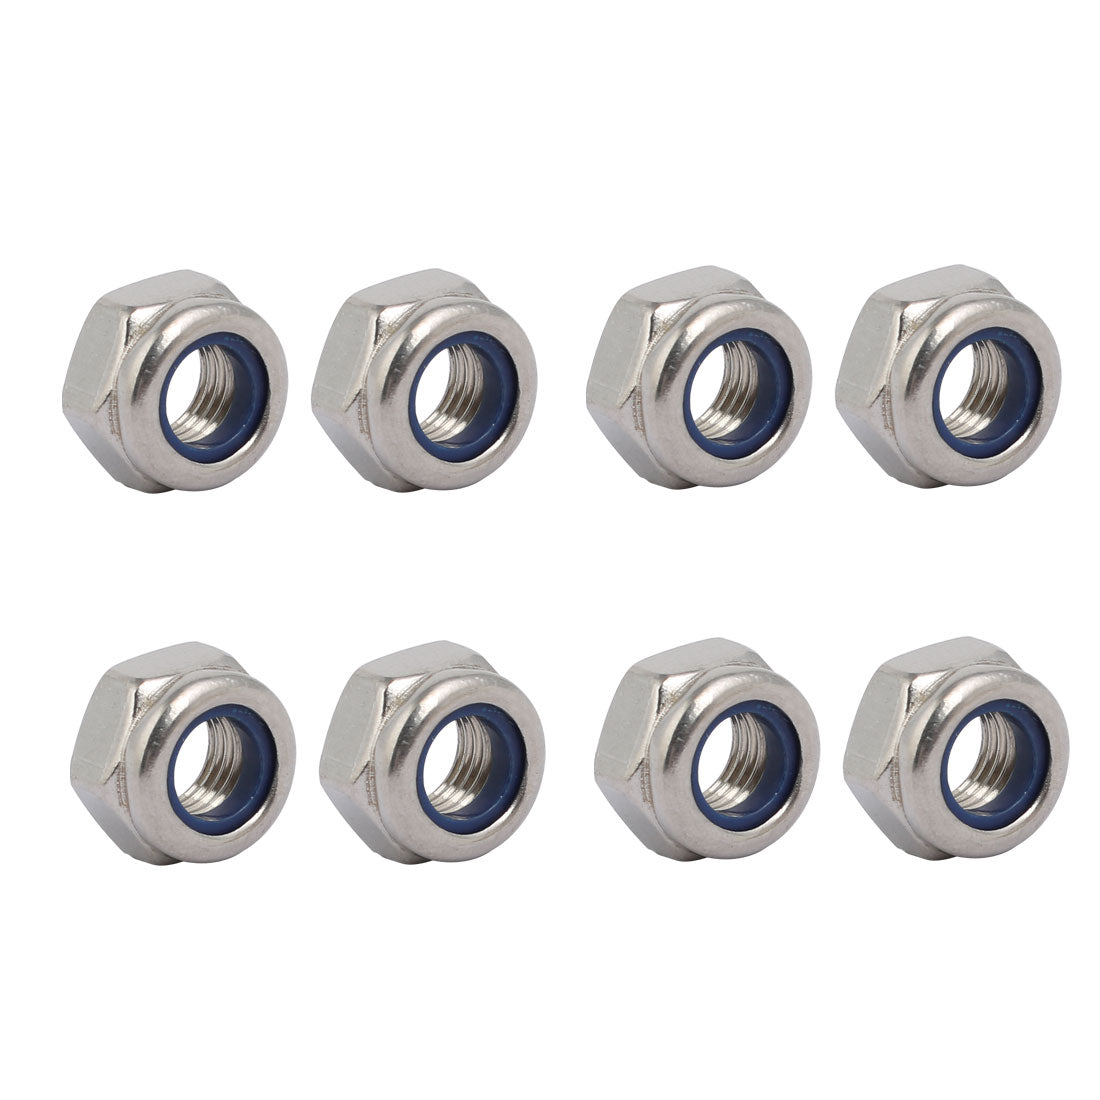 uxcell Uxcell 8pcs M8 x 1mm Pitch Metric Fine Thread 304 Stainless Steel Hex Lock Nuts